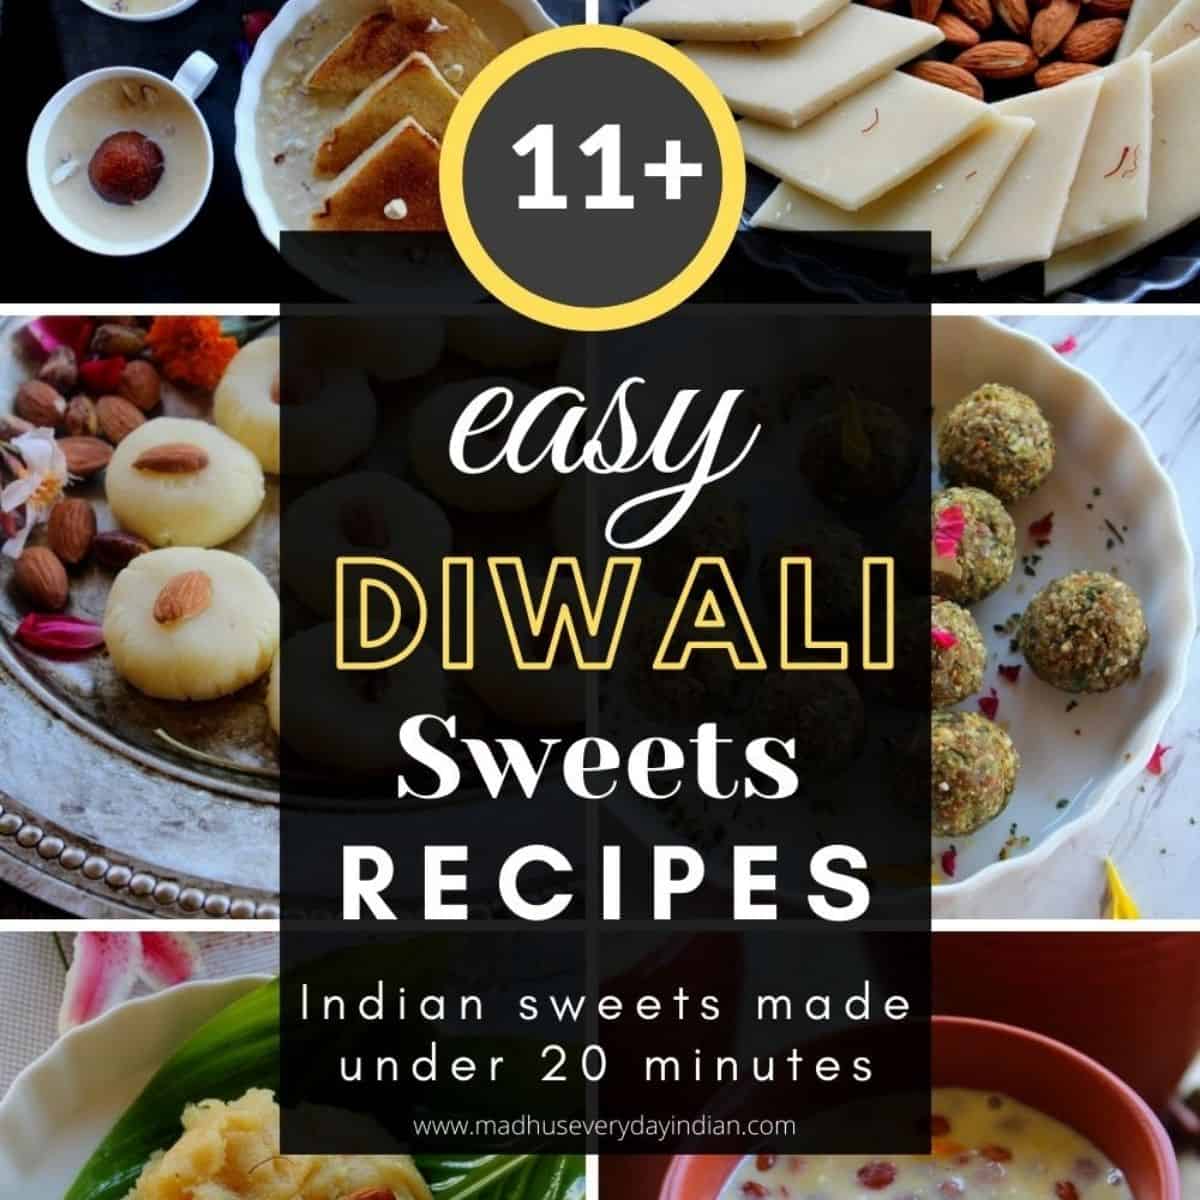 70+ Diwali Sweets Recipes - Spice Up The Curry